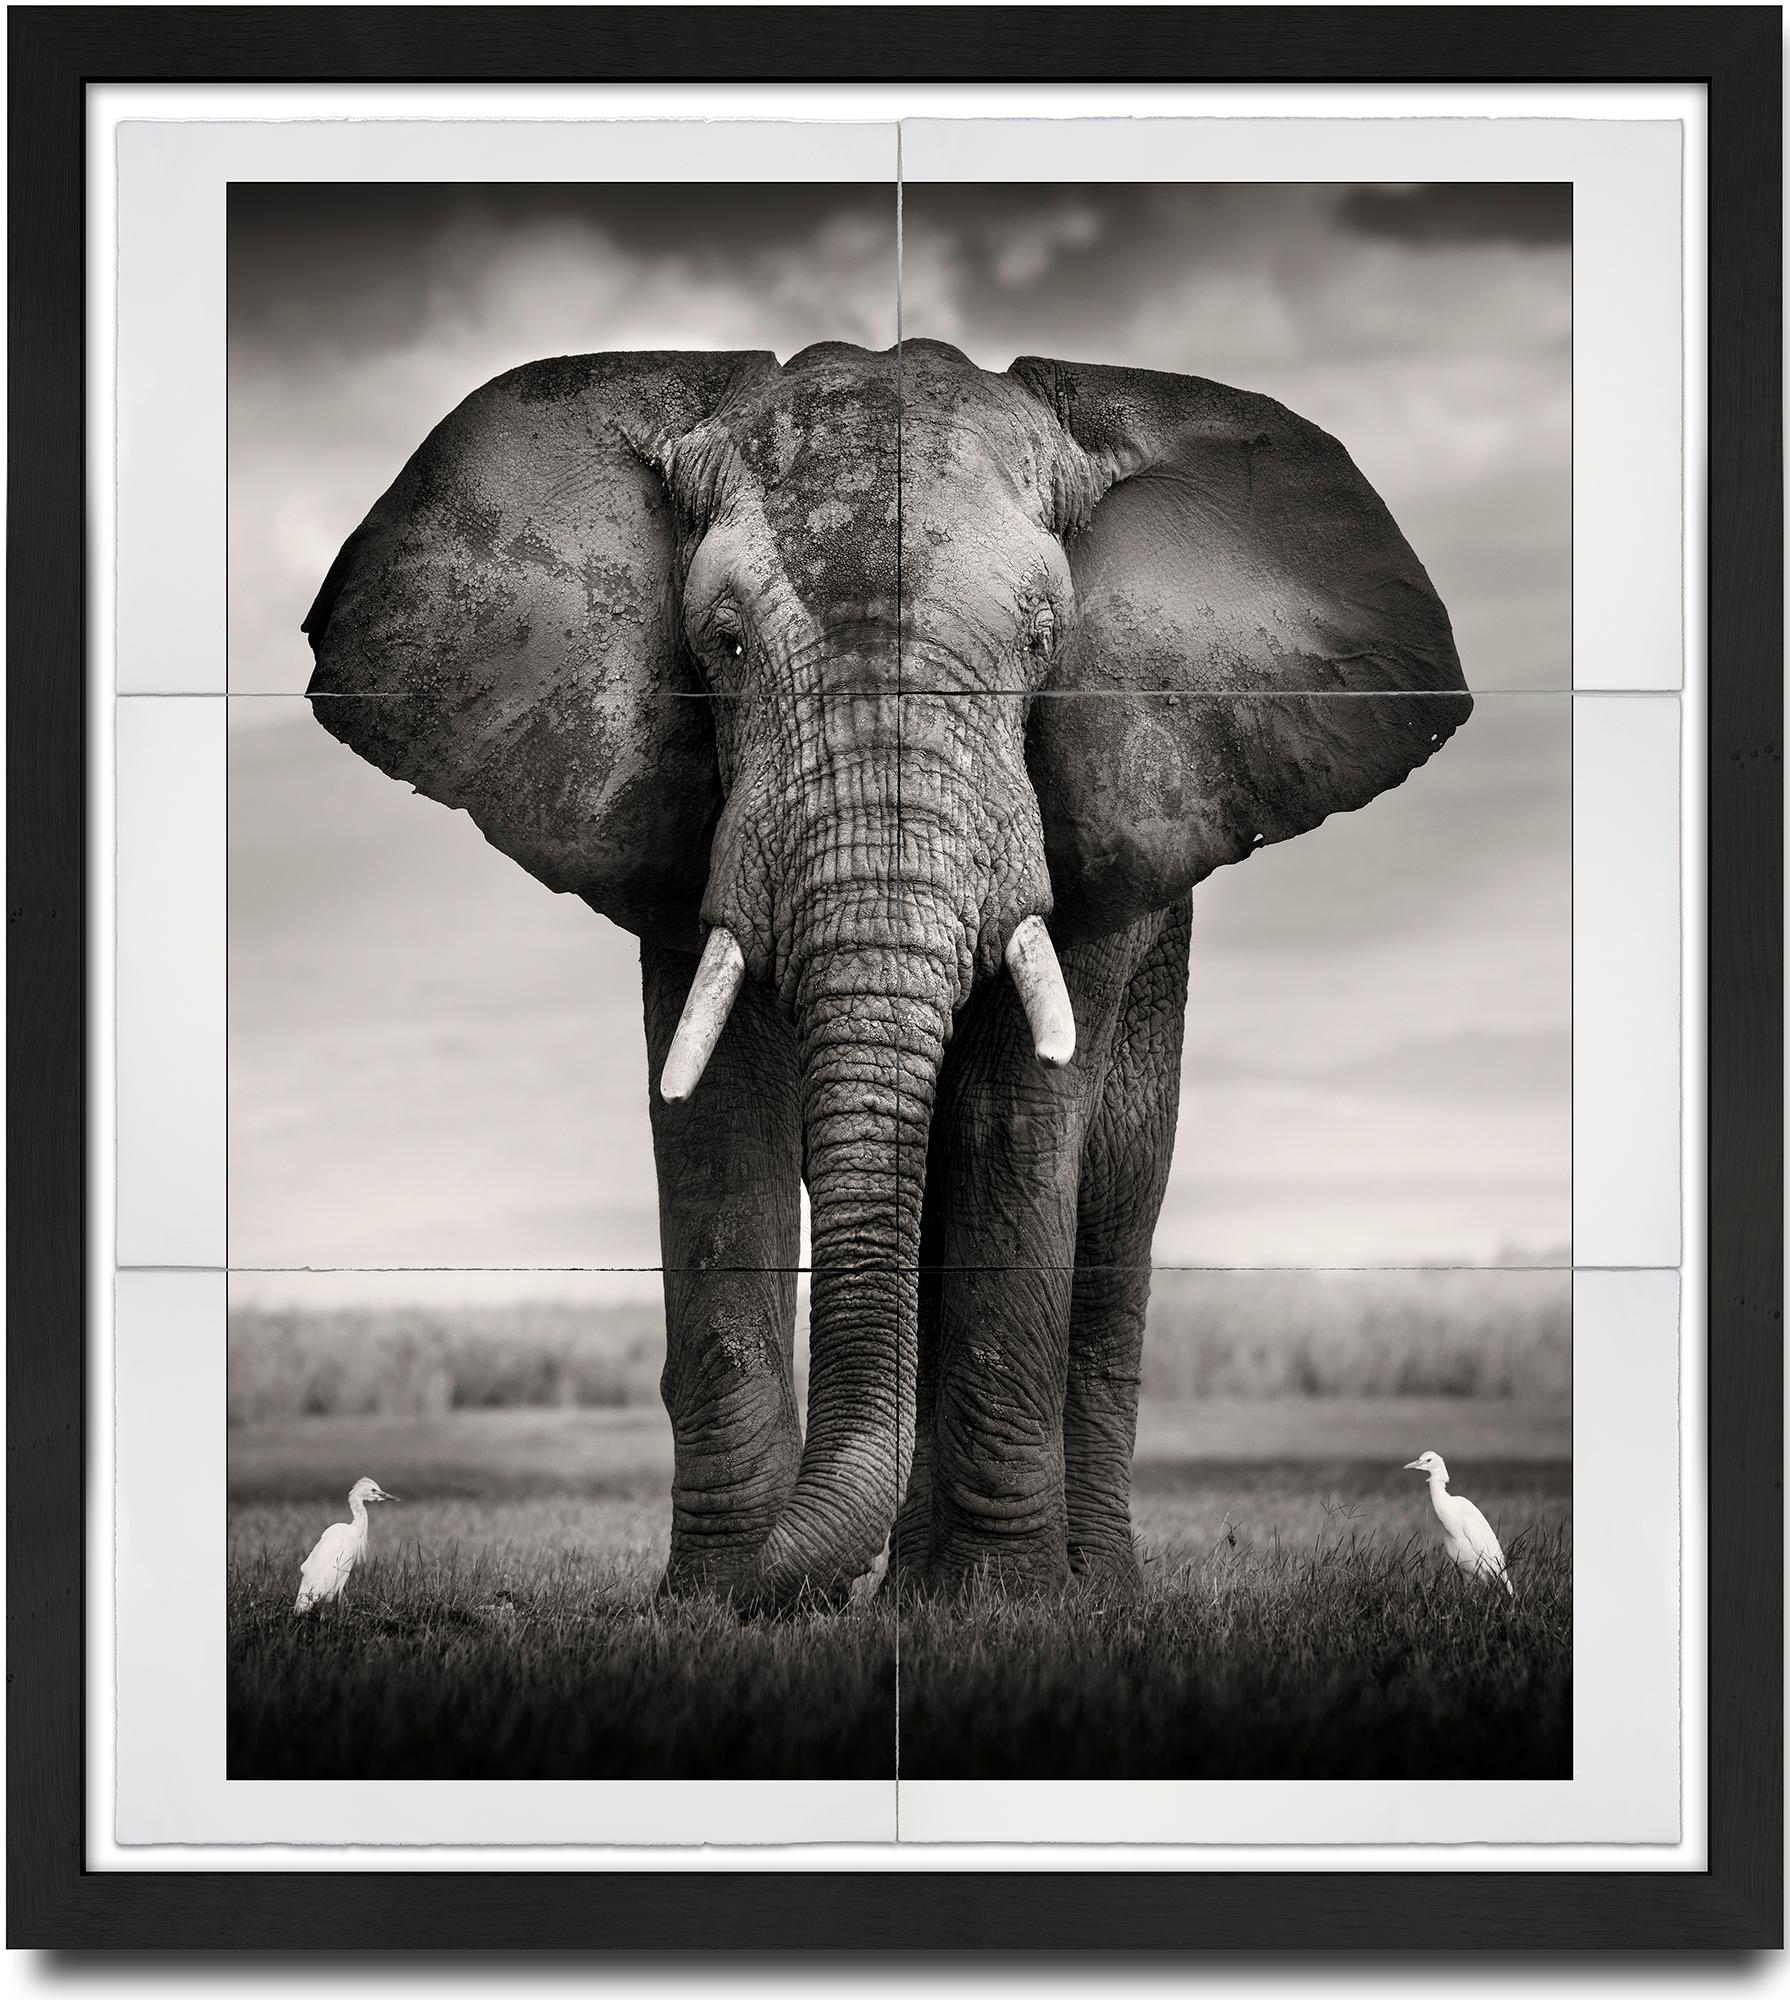 Joachim Schmeisser Portrait Photograph - Bull with two Birds, Platinum, animal, elephant, black and white photography